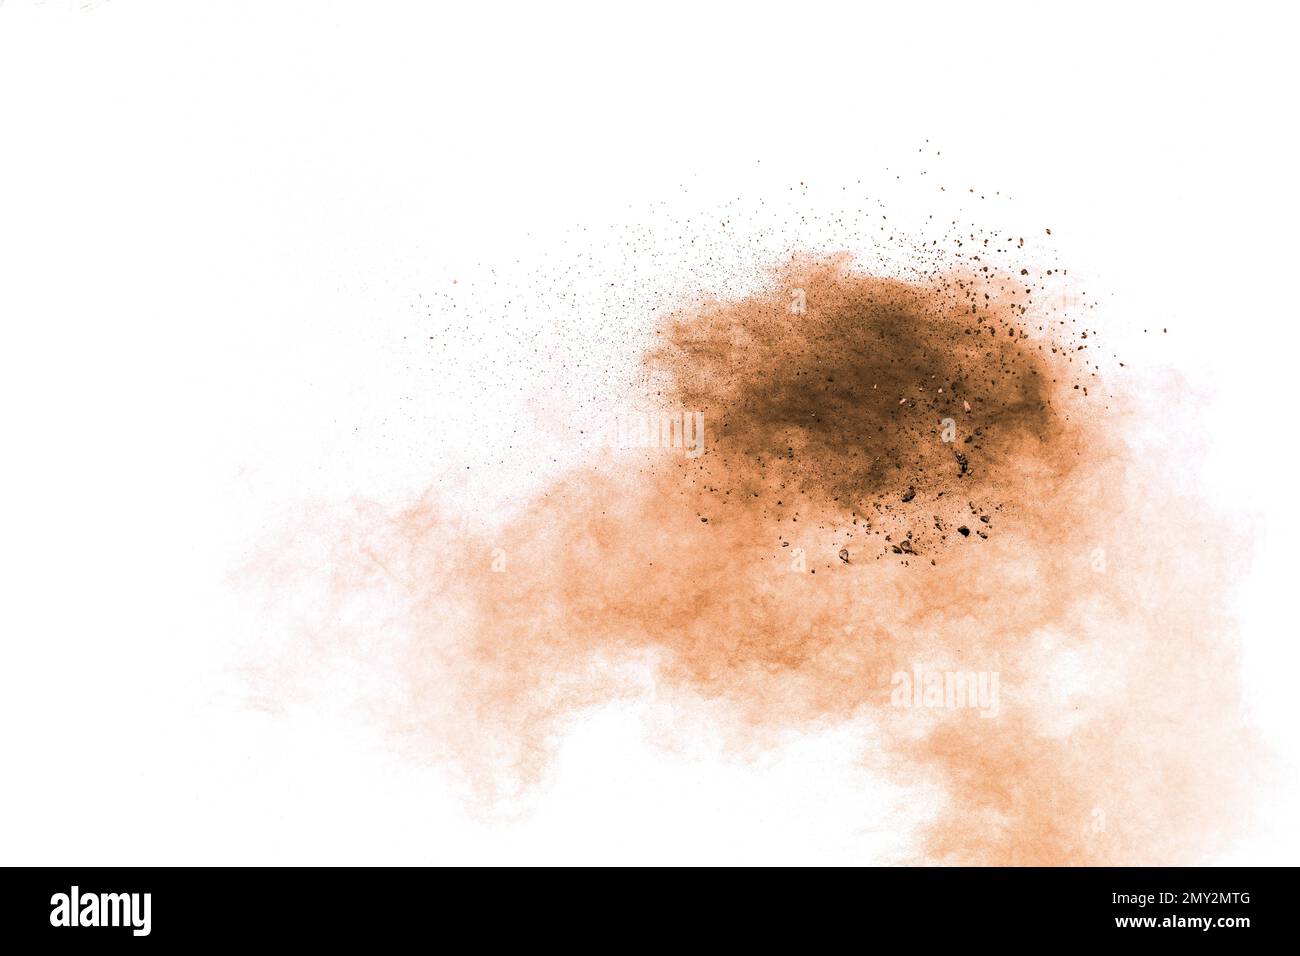 Freeze motion of brown dust explosion on white background.Stopping the movement of brown powder. Stock Photo